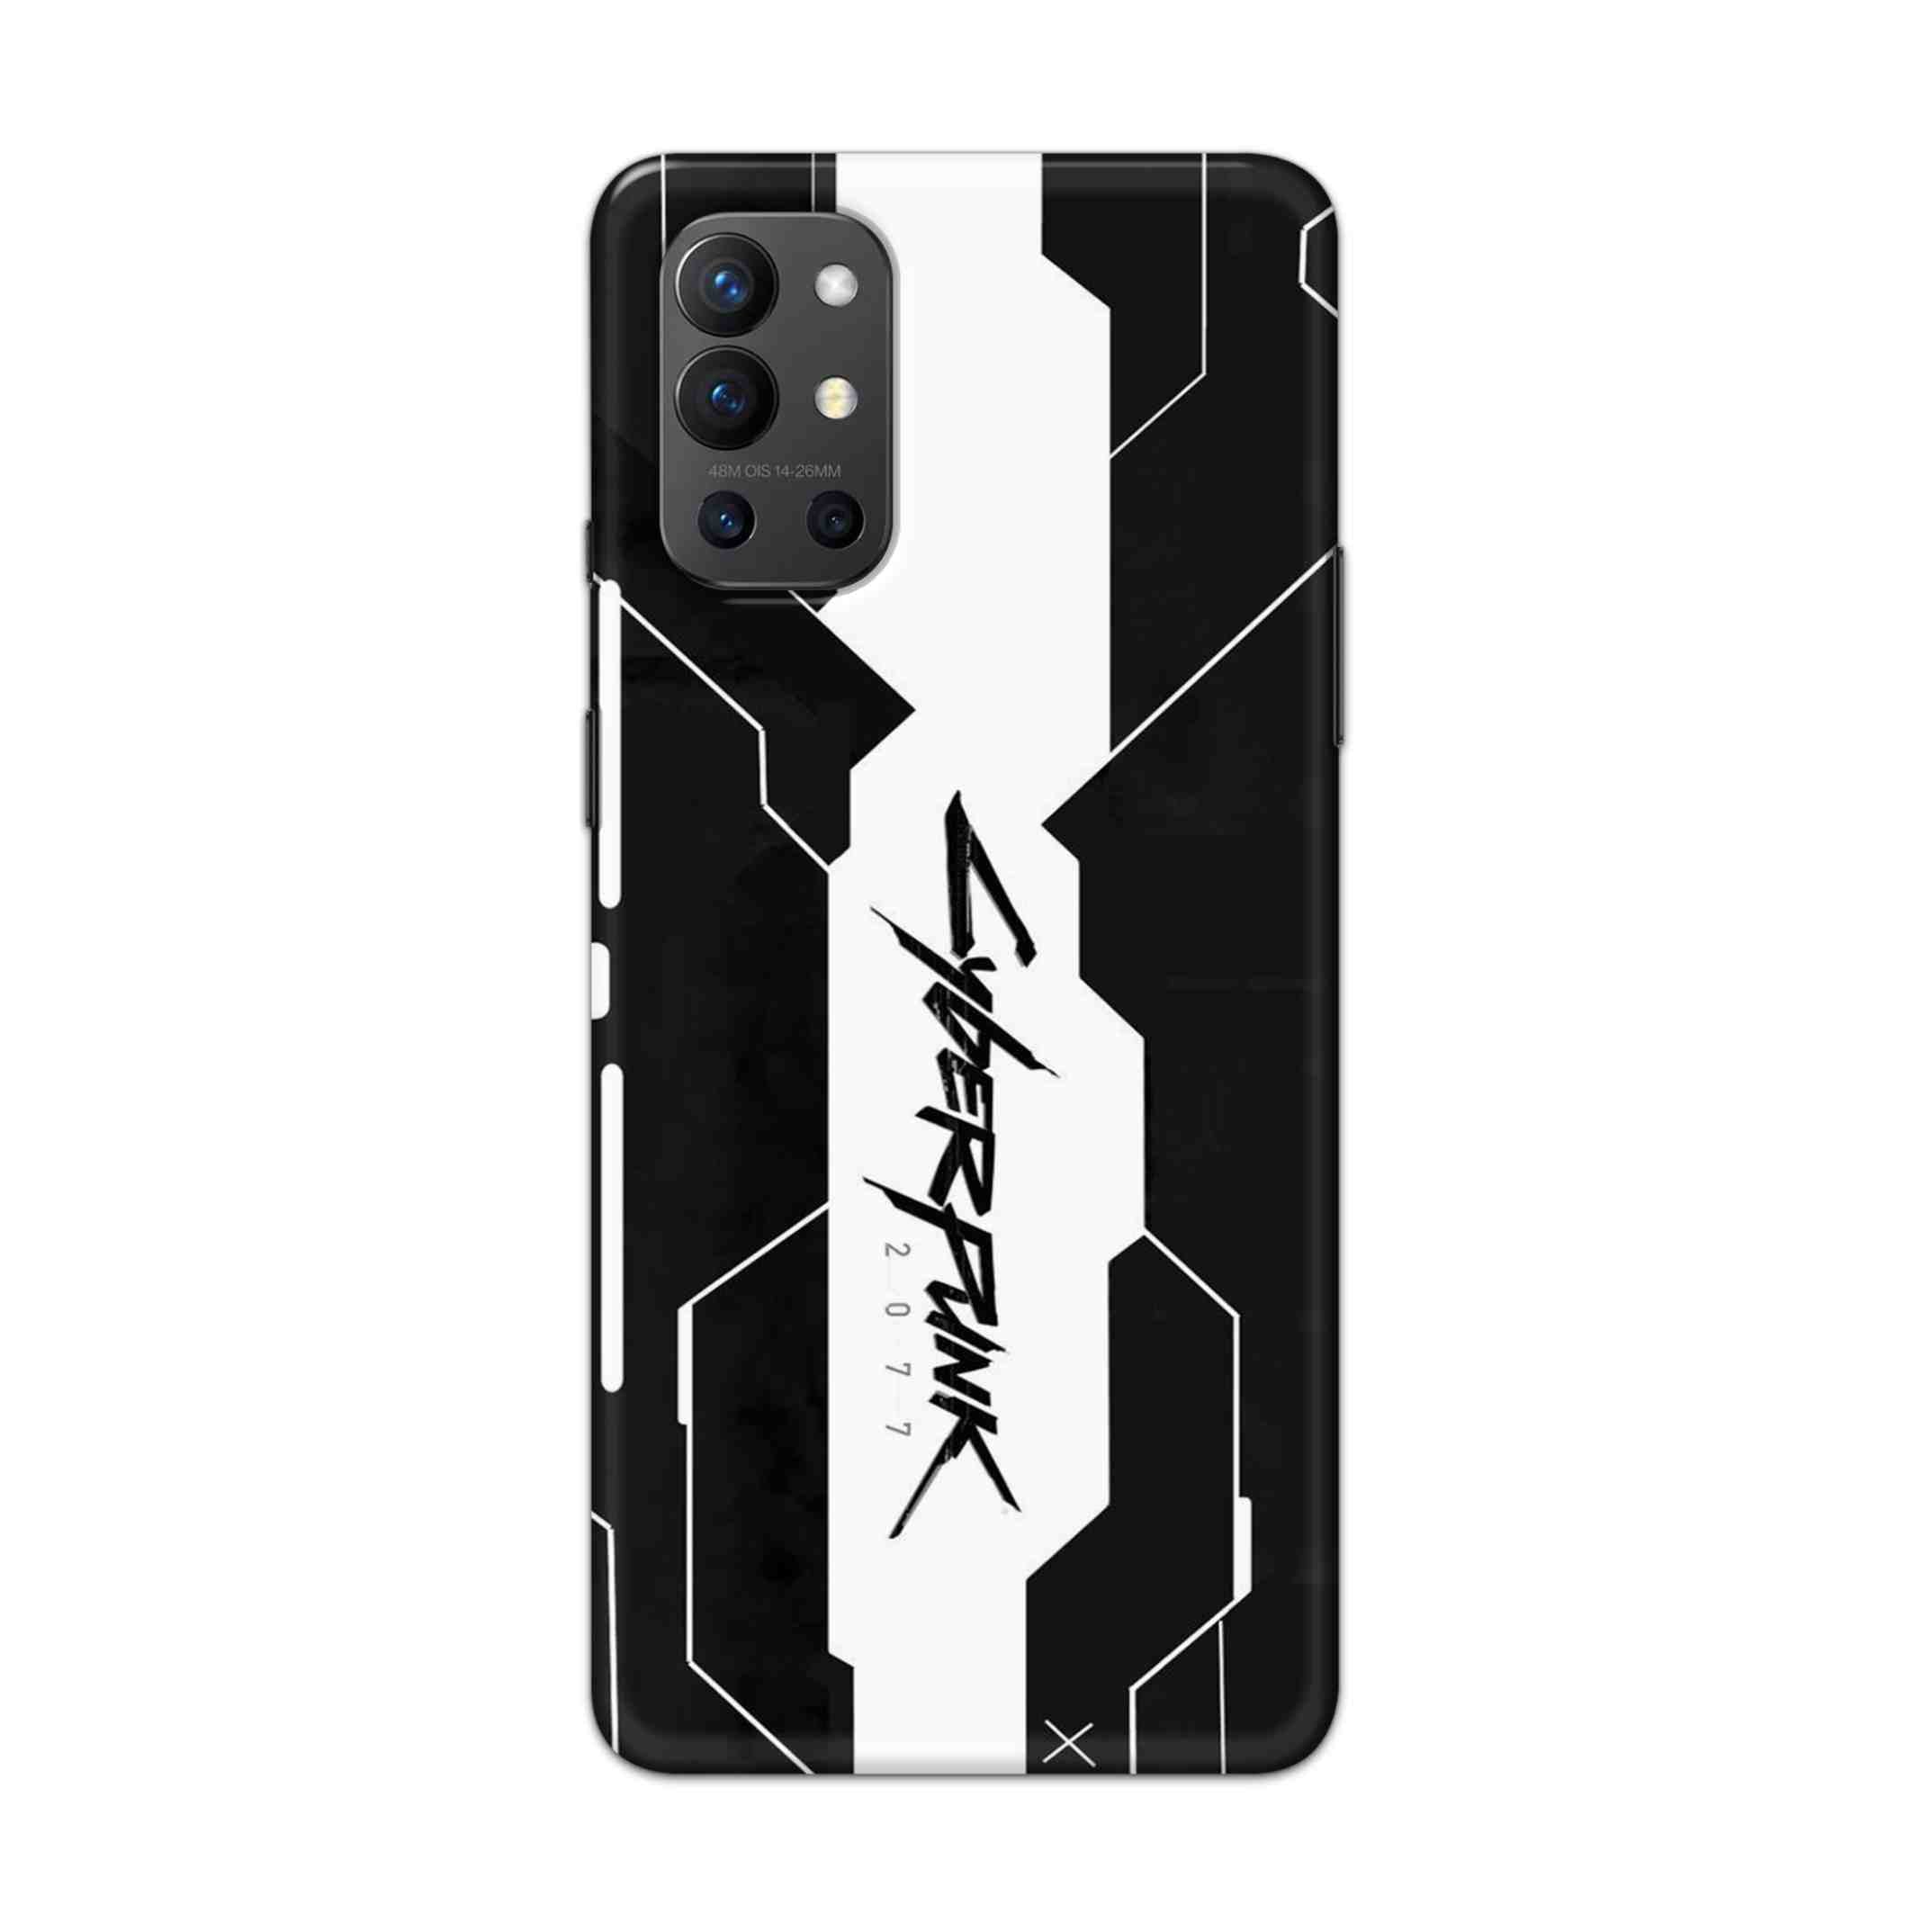 Buy Cyberpunk 2077 Art Hard Back Mobile Phone Case Cover For OnePlus 9R / 8T Online